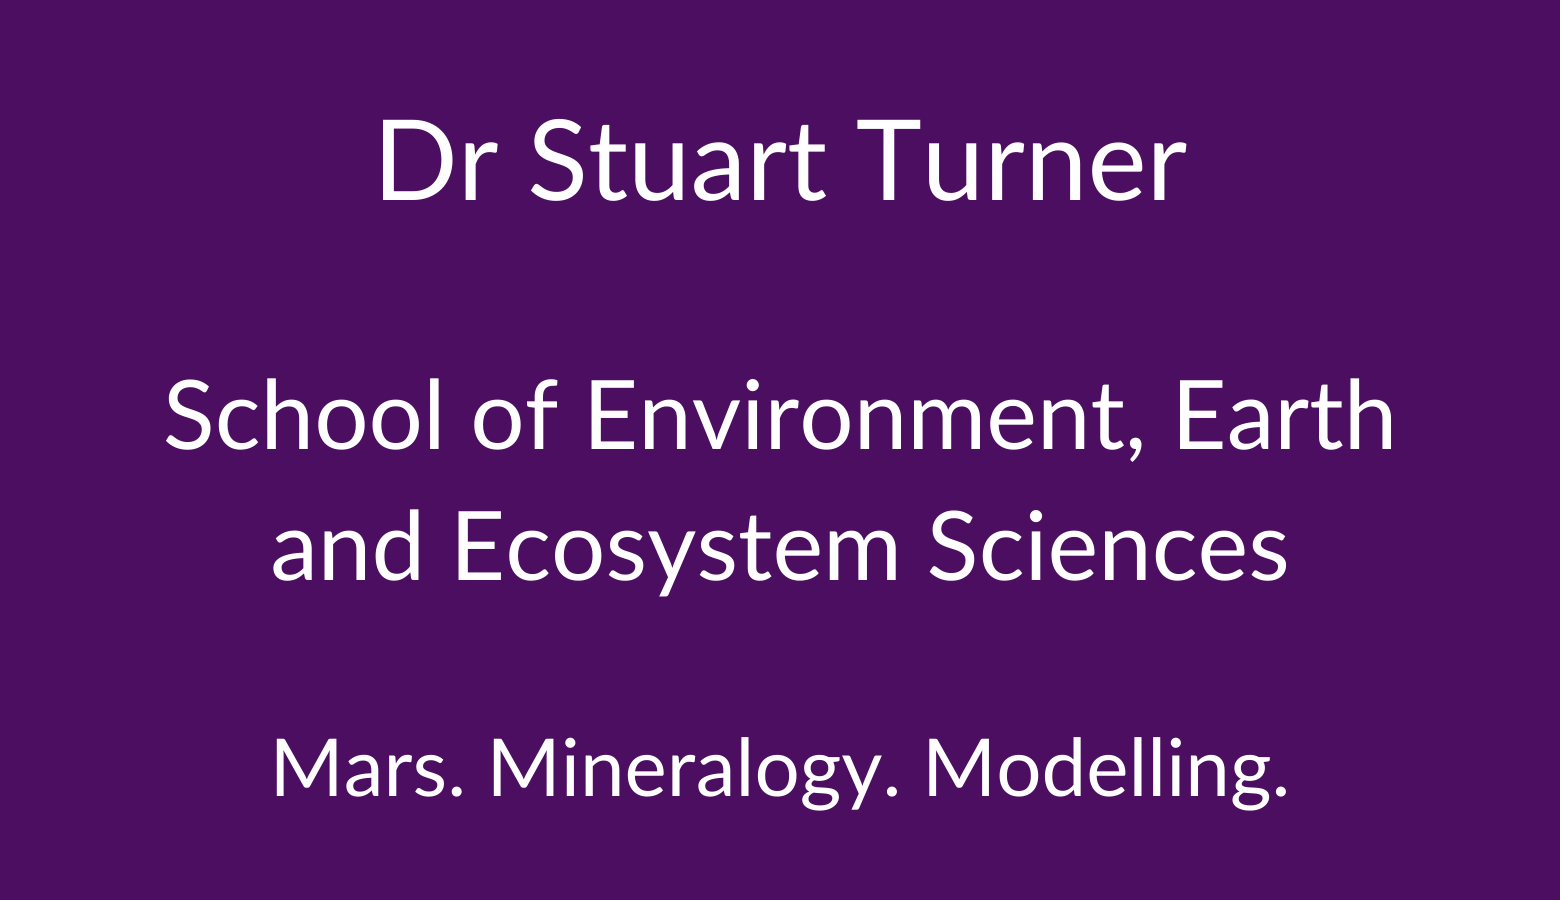 Dr Stuart Turner. School of Environment, Earth and Ecosystem Sciences. Mars, Mineralogy. Modelling